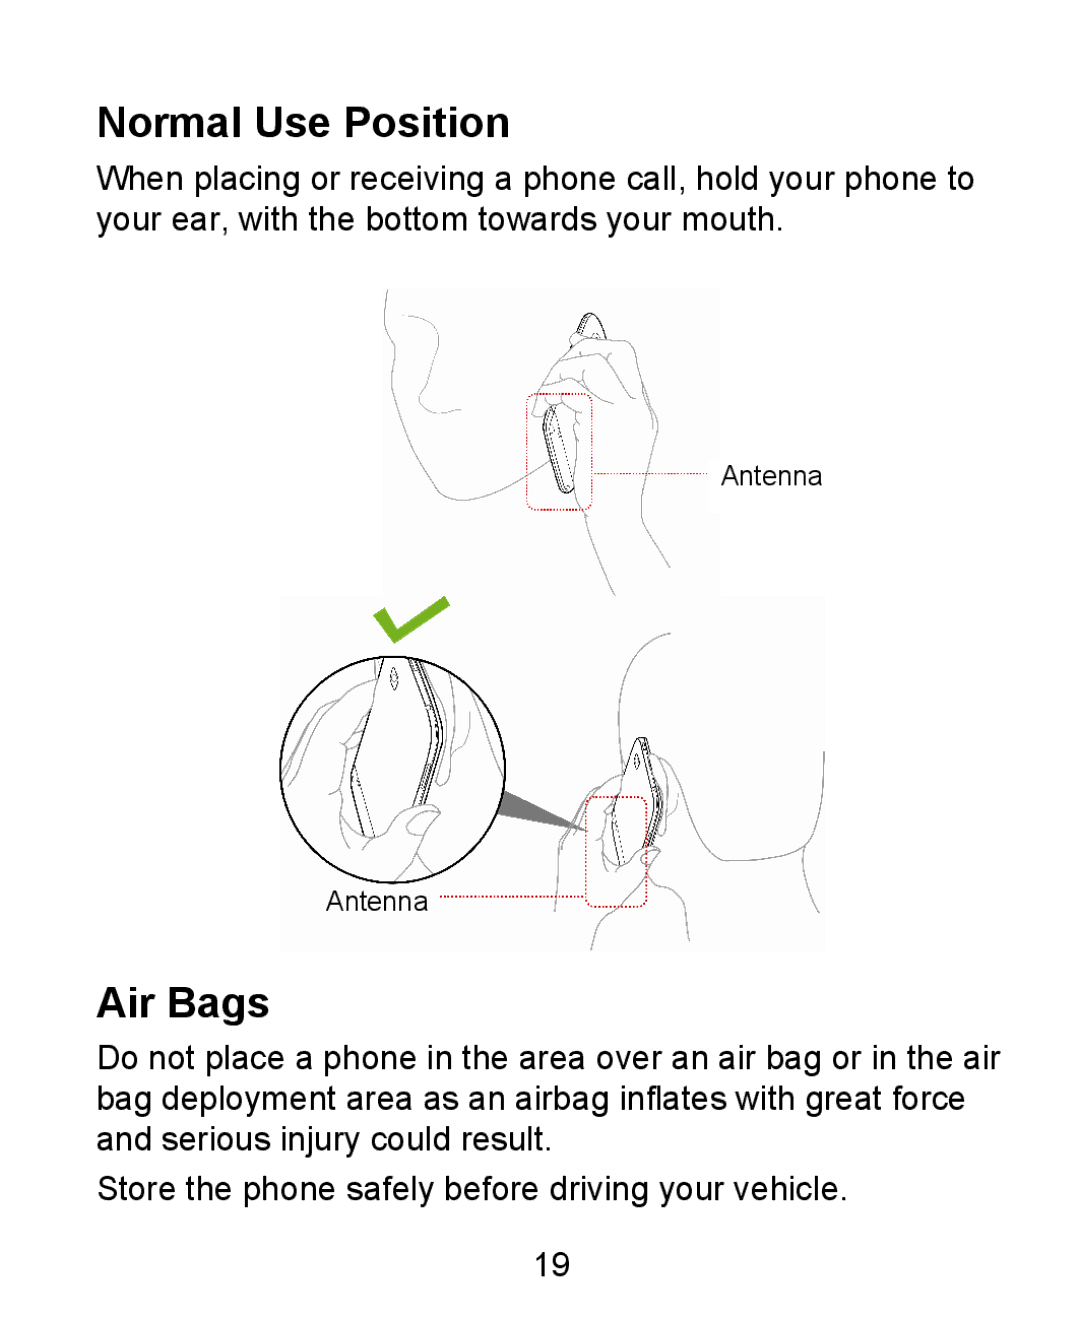 ZTE KIS user manual Normal Use Position, Air Bags 